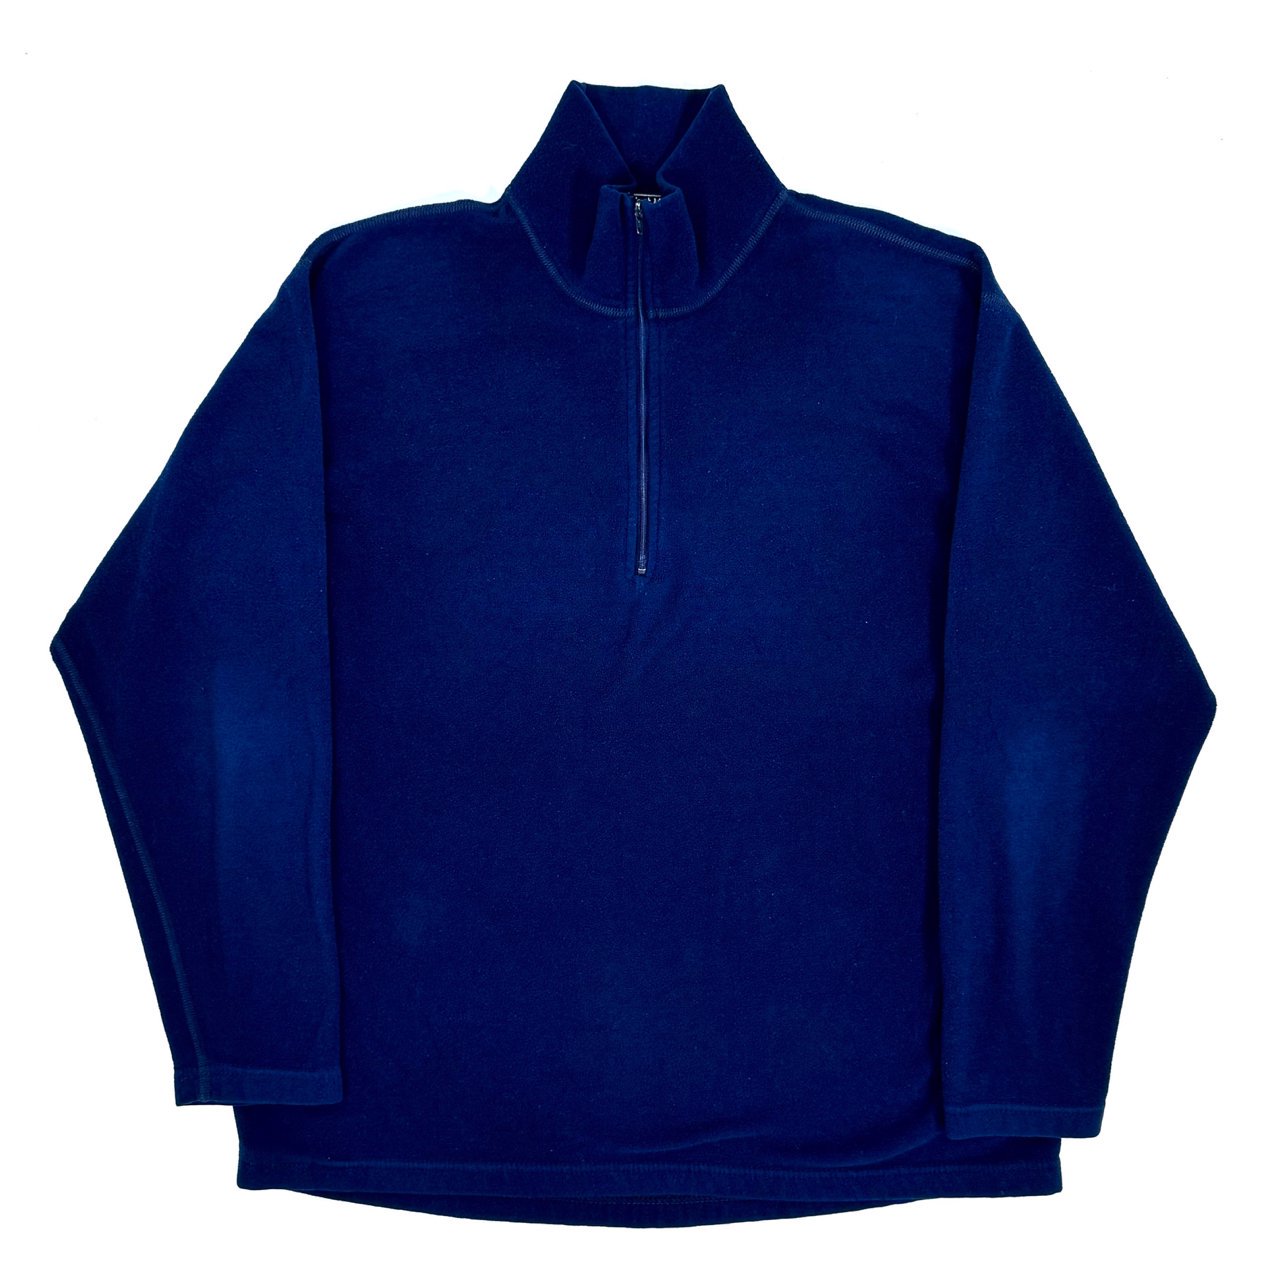 1990s West Marine Light weight fleece pullover L MADE IN USA Navy